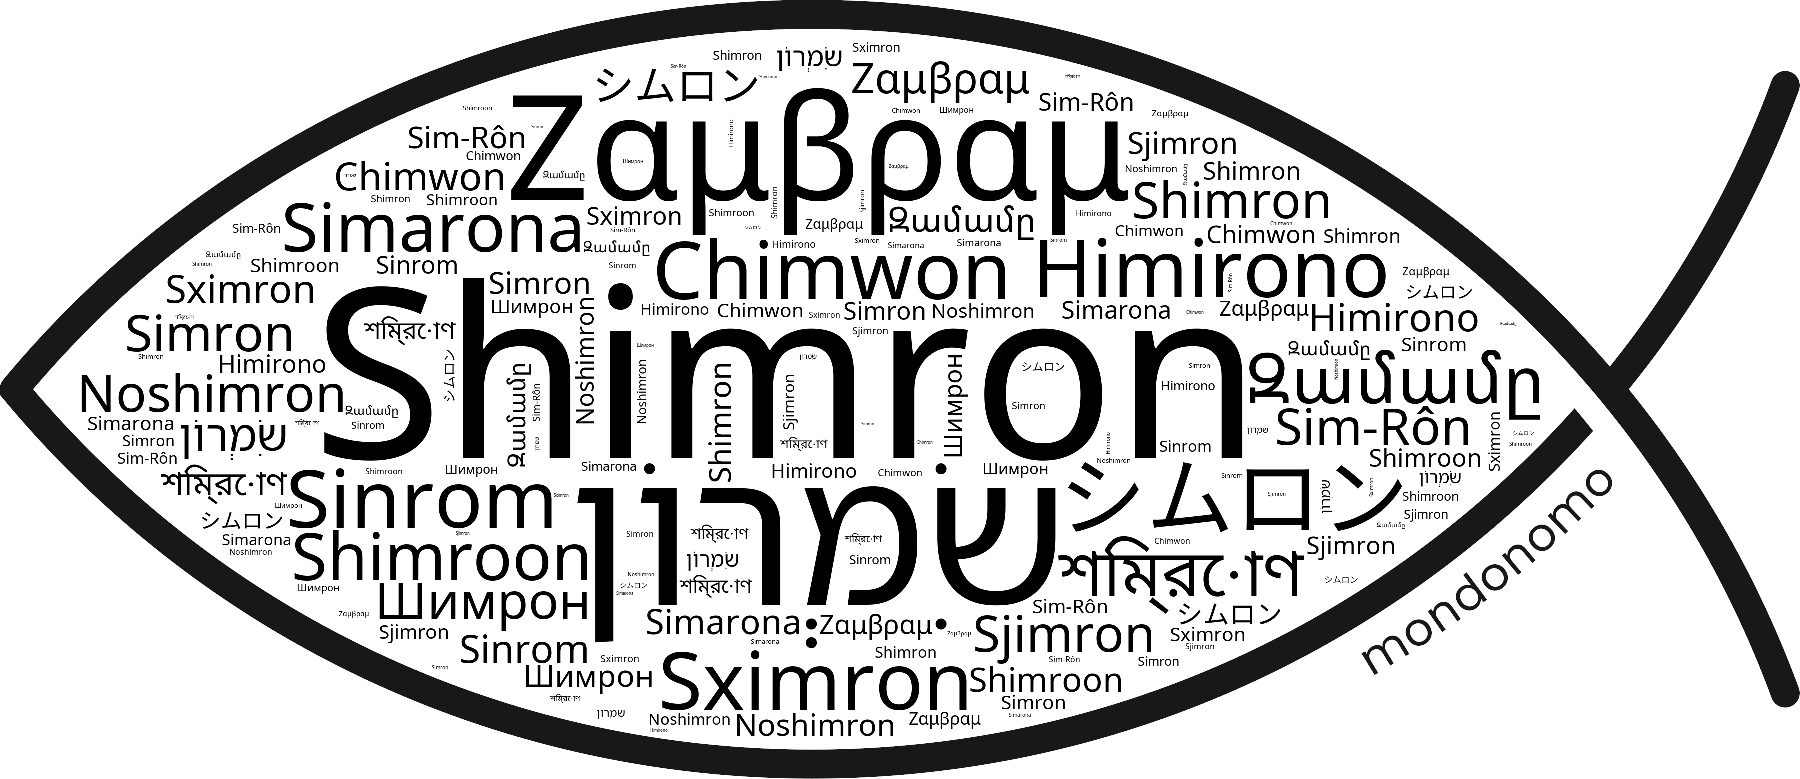 Name Shimron in the world's Bibles